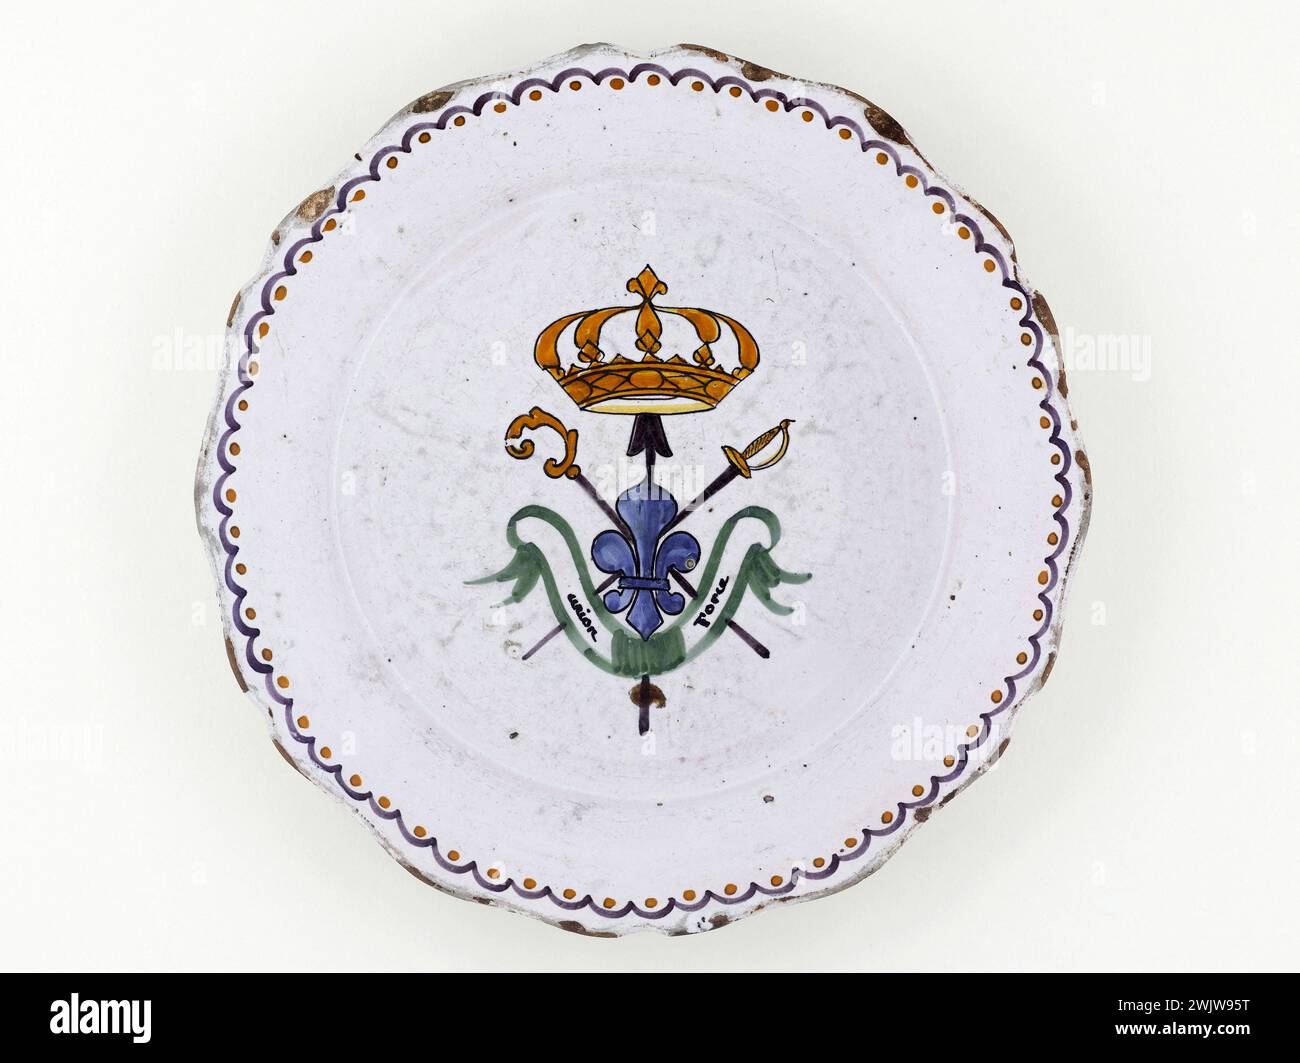 Anonymous. Plate. Earthenware. 1789. Paris, Carnavalet museum. 70955-6 Weapon, Crown, Epee, Faience, Flower, Force, Decorative Pattern, Revolutionary Periode, French Revolution, Union, Crockery, Putch Stock Photo